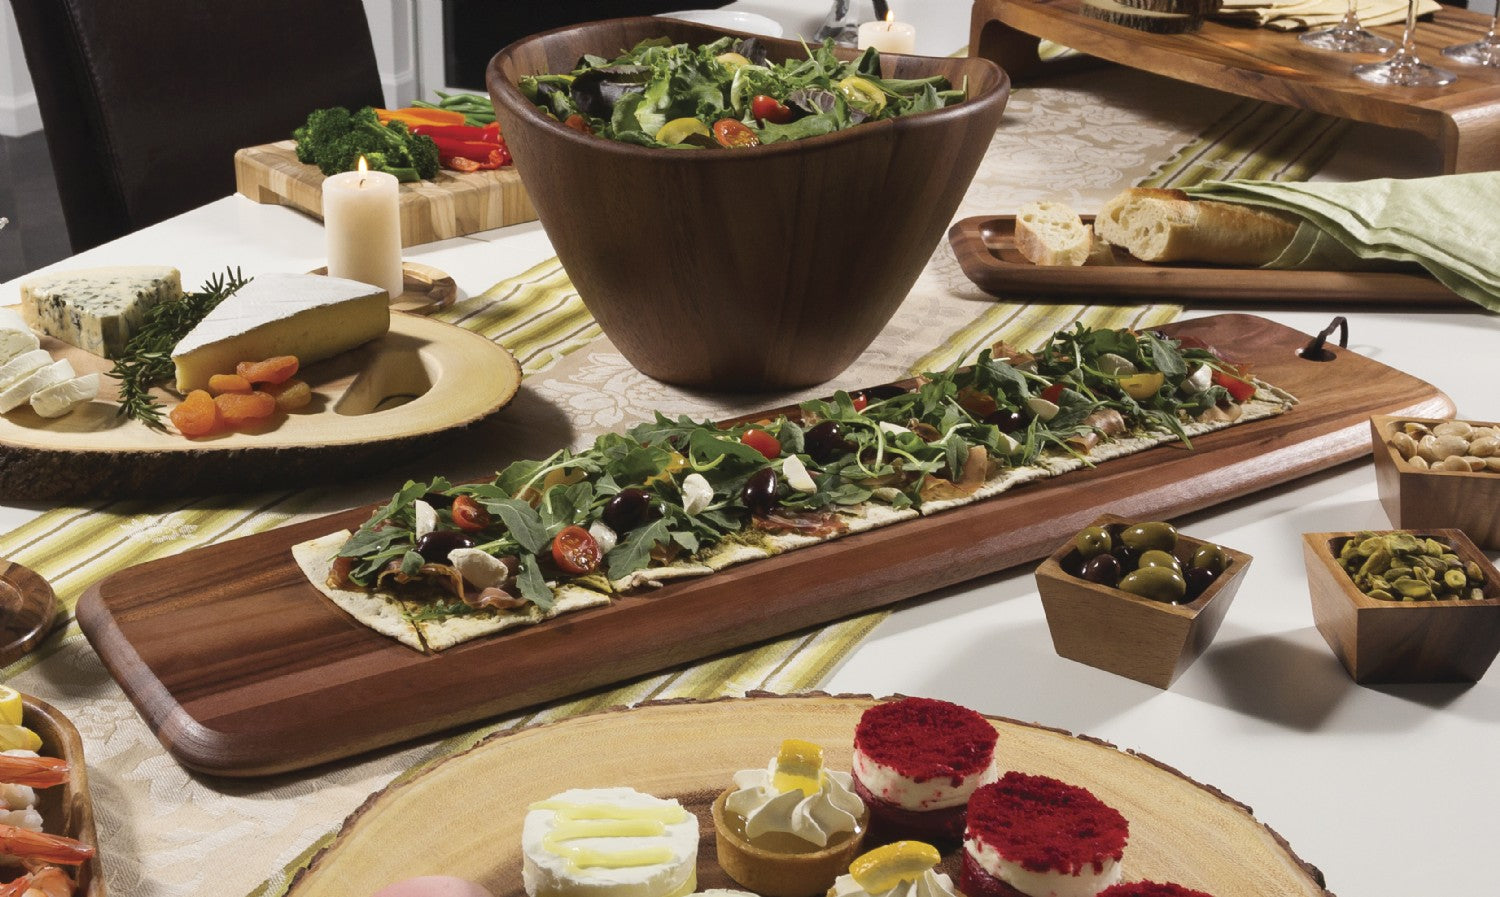 table setting with the acacia wood serving board next to a wood salad bowl round charcuterie boards filled with foods on a striped tablecloth